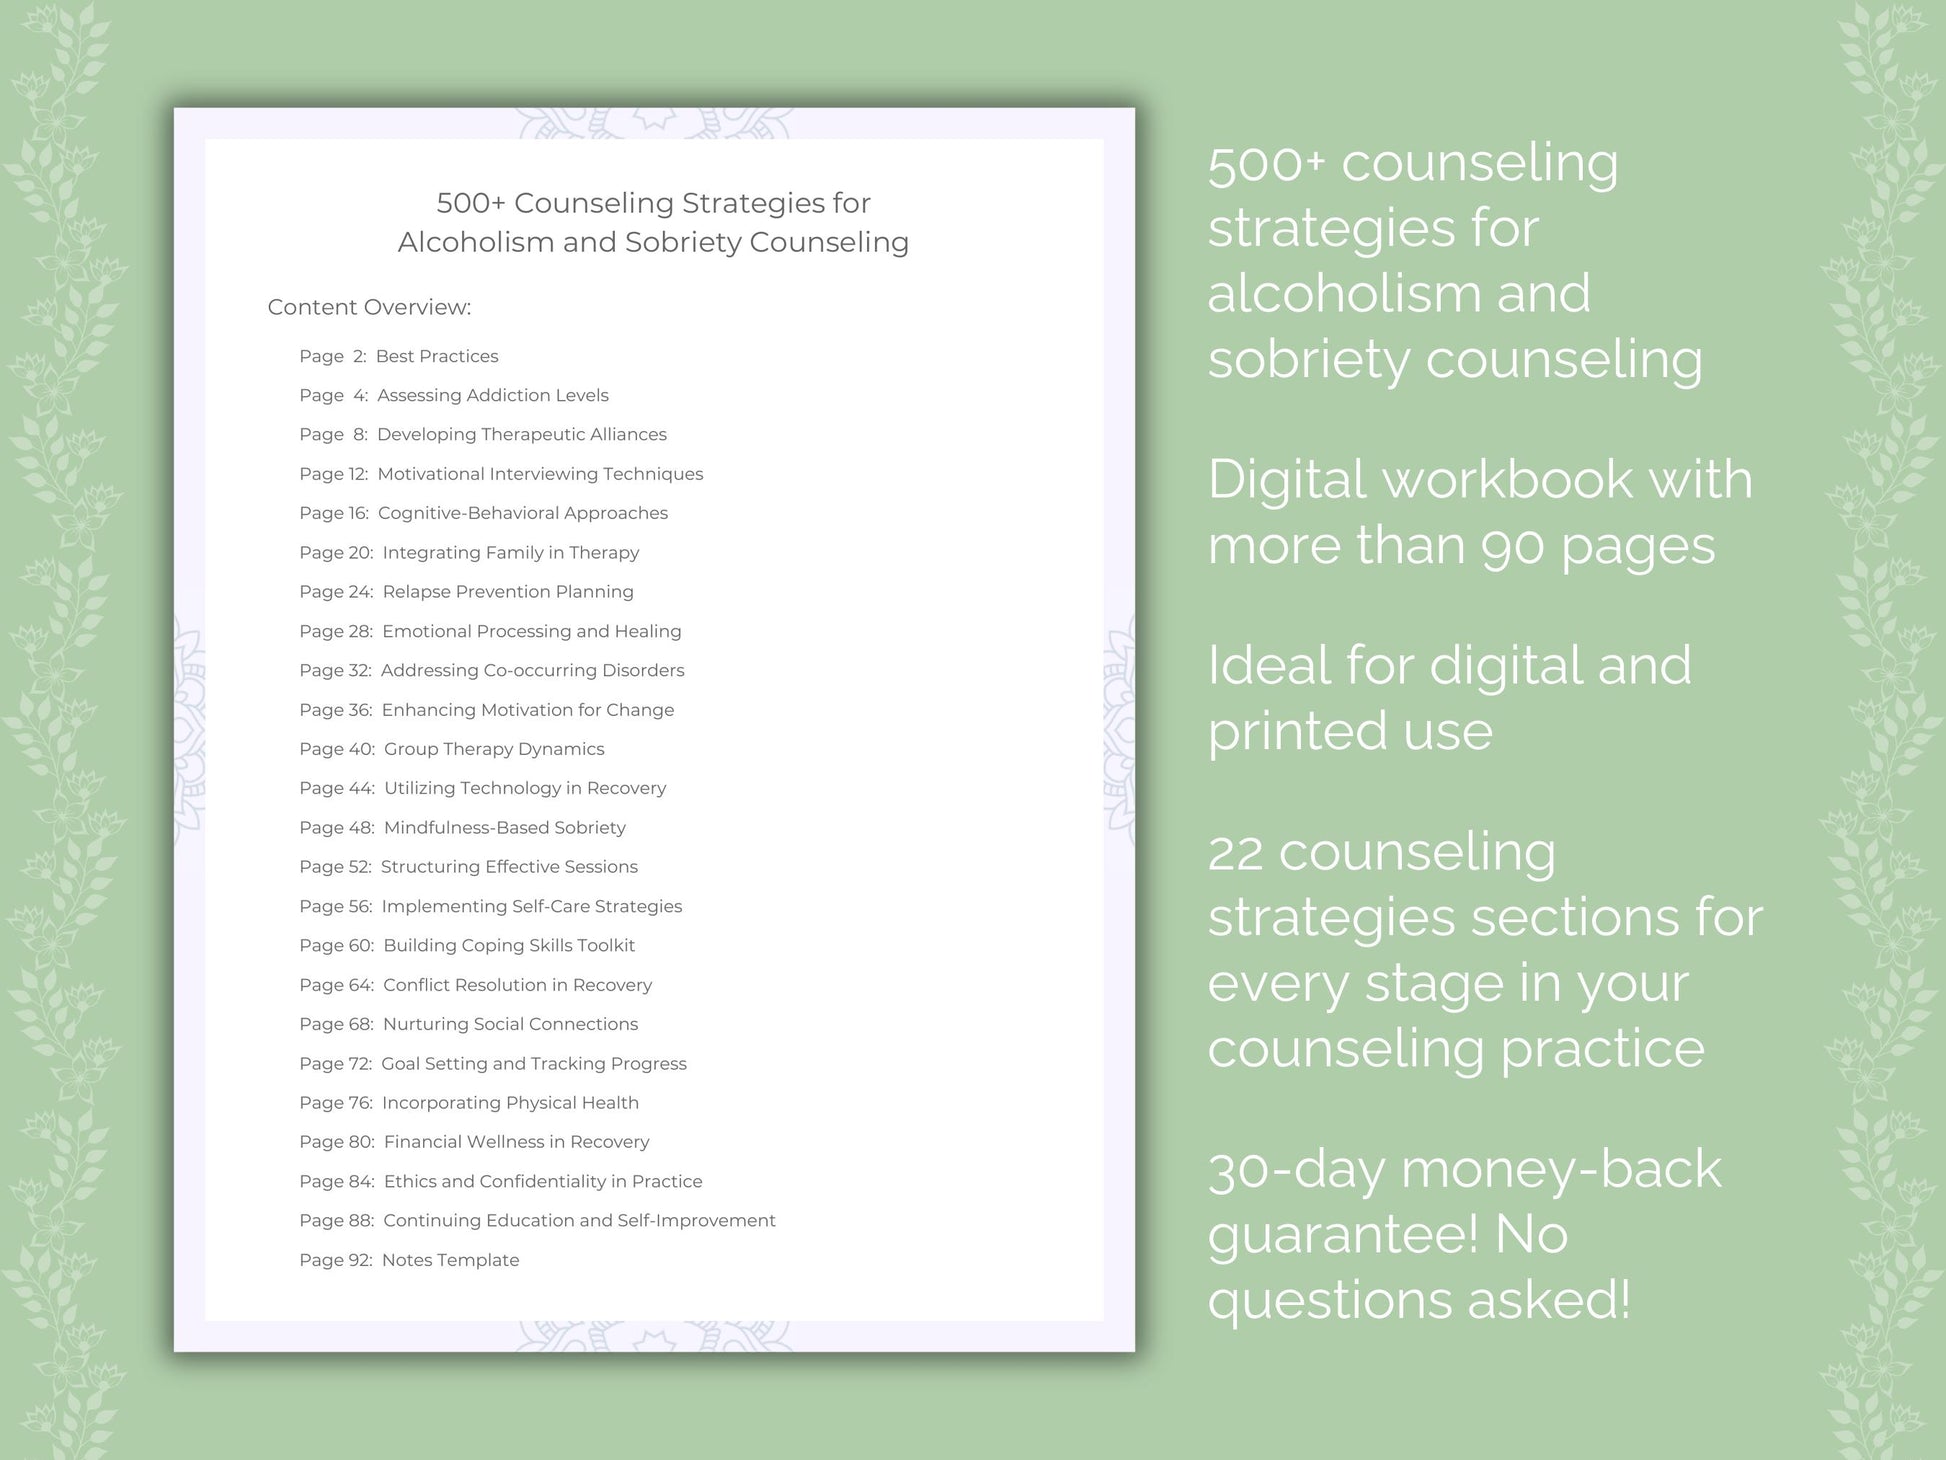 Alcoholism and Sobriety Counseling Strategies Resource